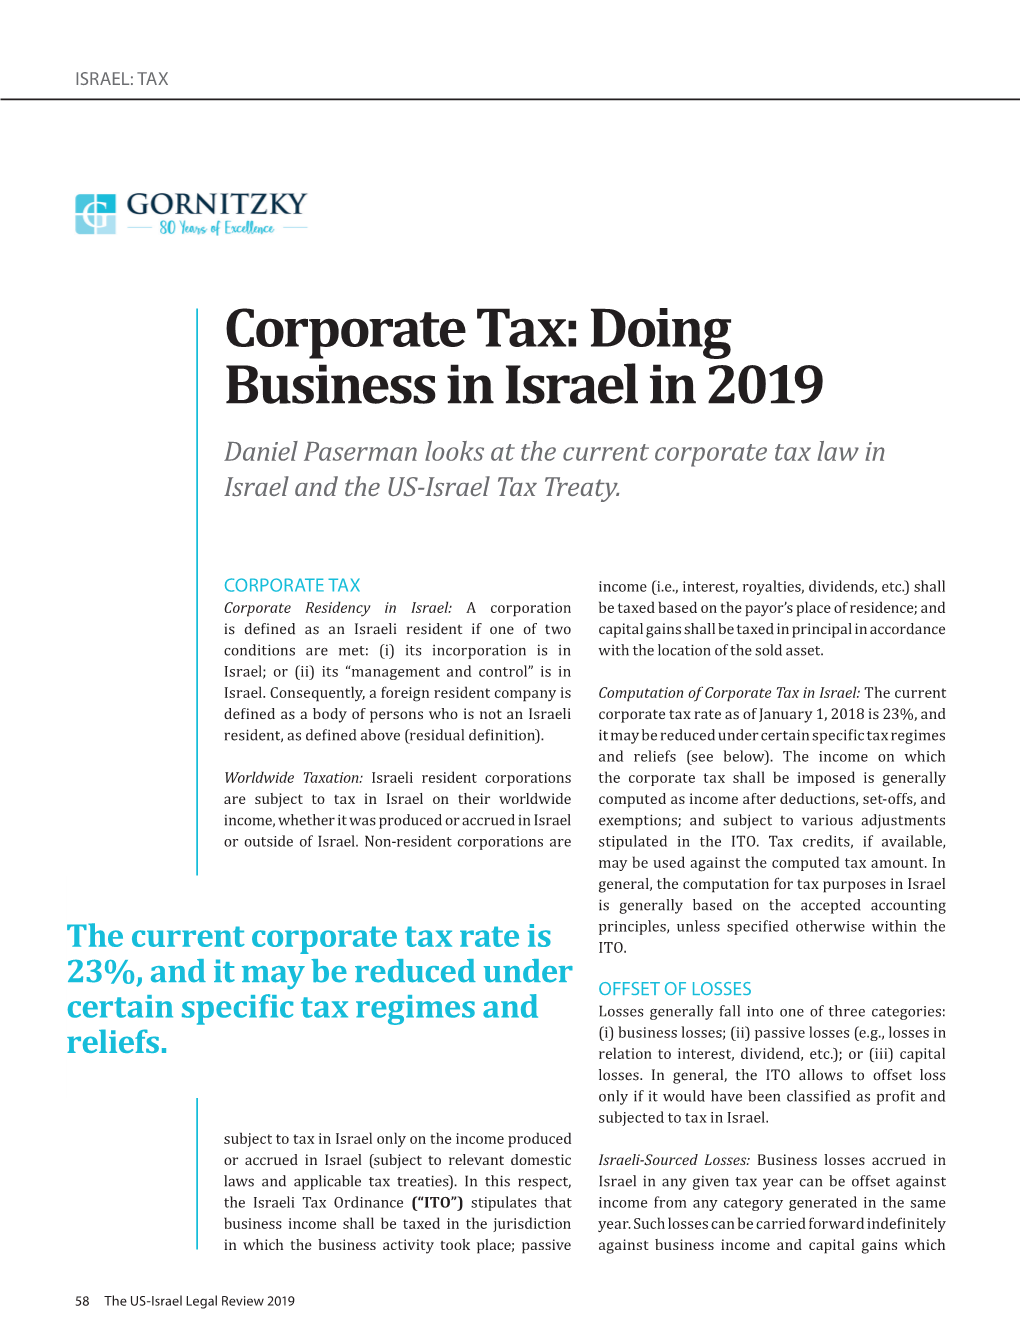 Corporate Tax: Doing Business in Israel in 2019 Daniel Paserman Looks at the Current Corporate Tax Law in Israel and the US-Israel Tax Treaty